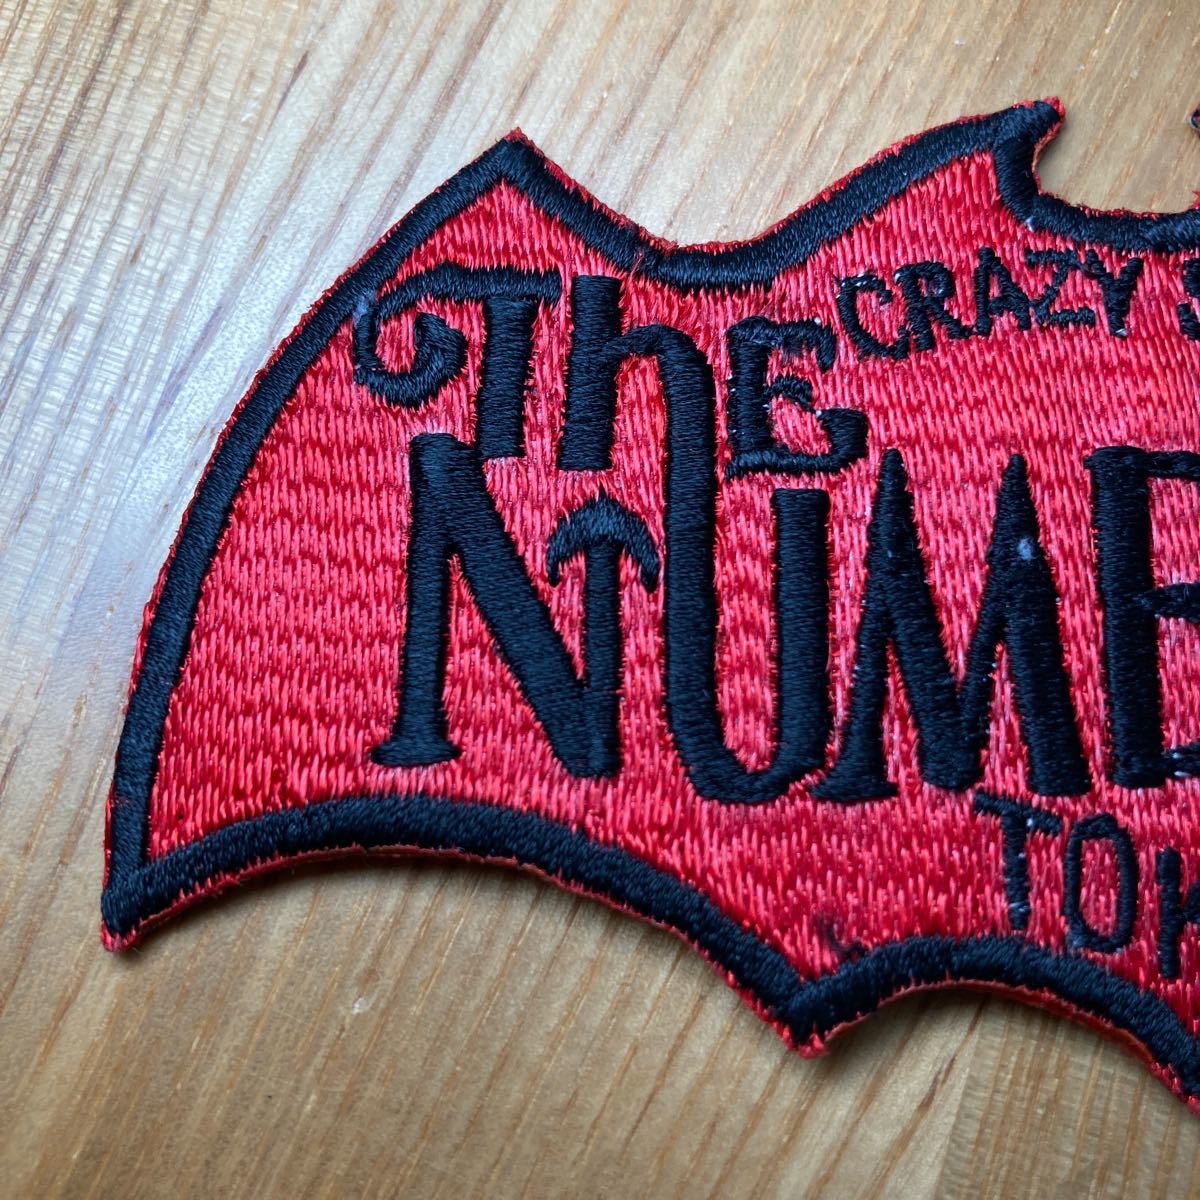 THE NUMBERS TOKYO m51 mods モッズ 刺繍ワッペン｜PayPayフリマ